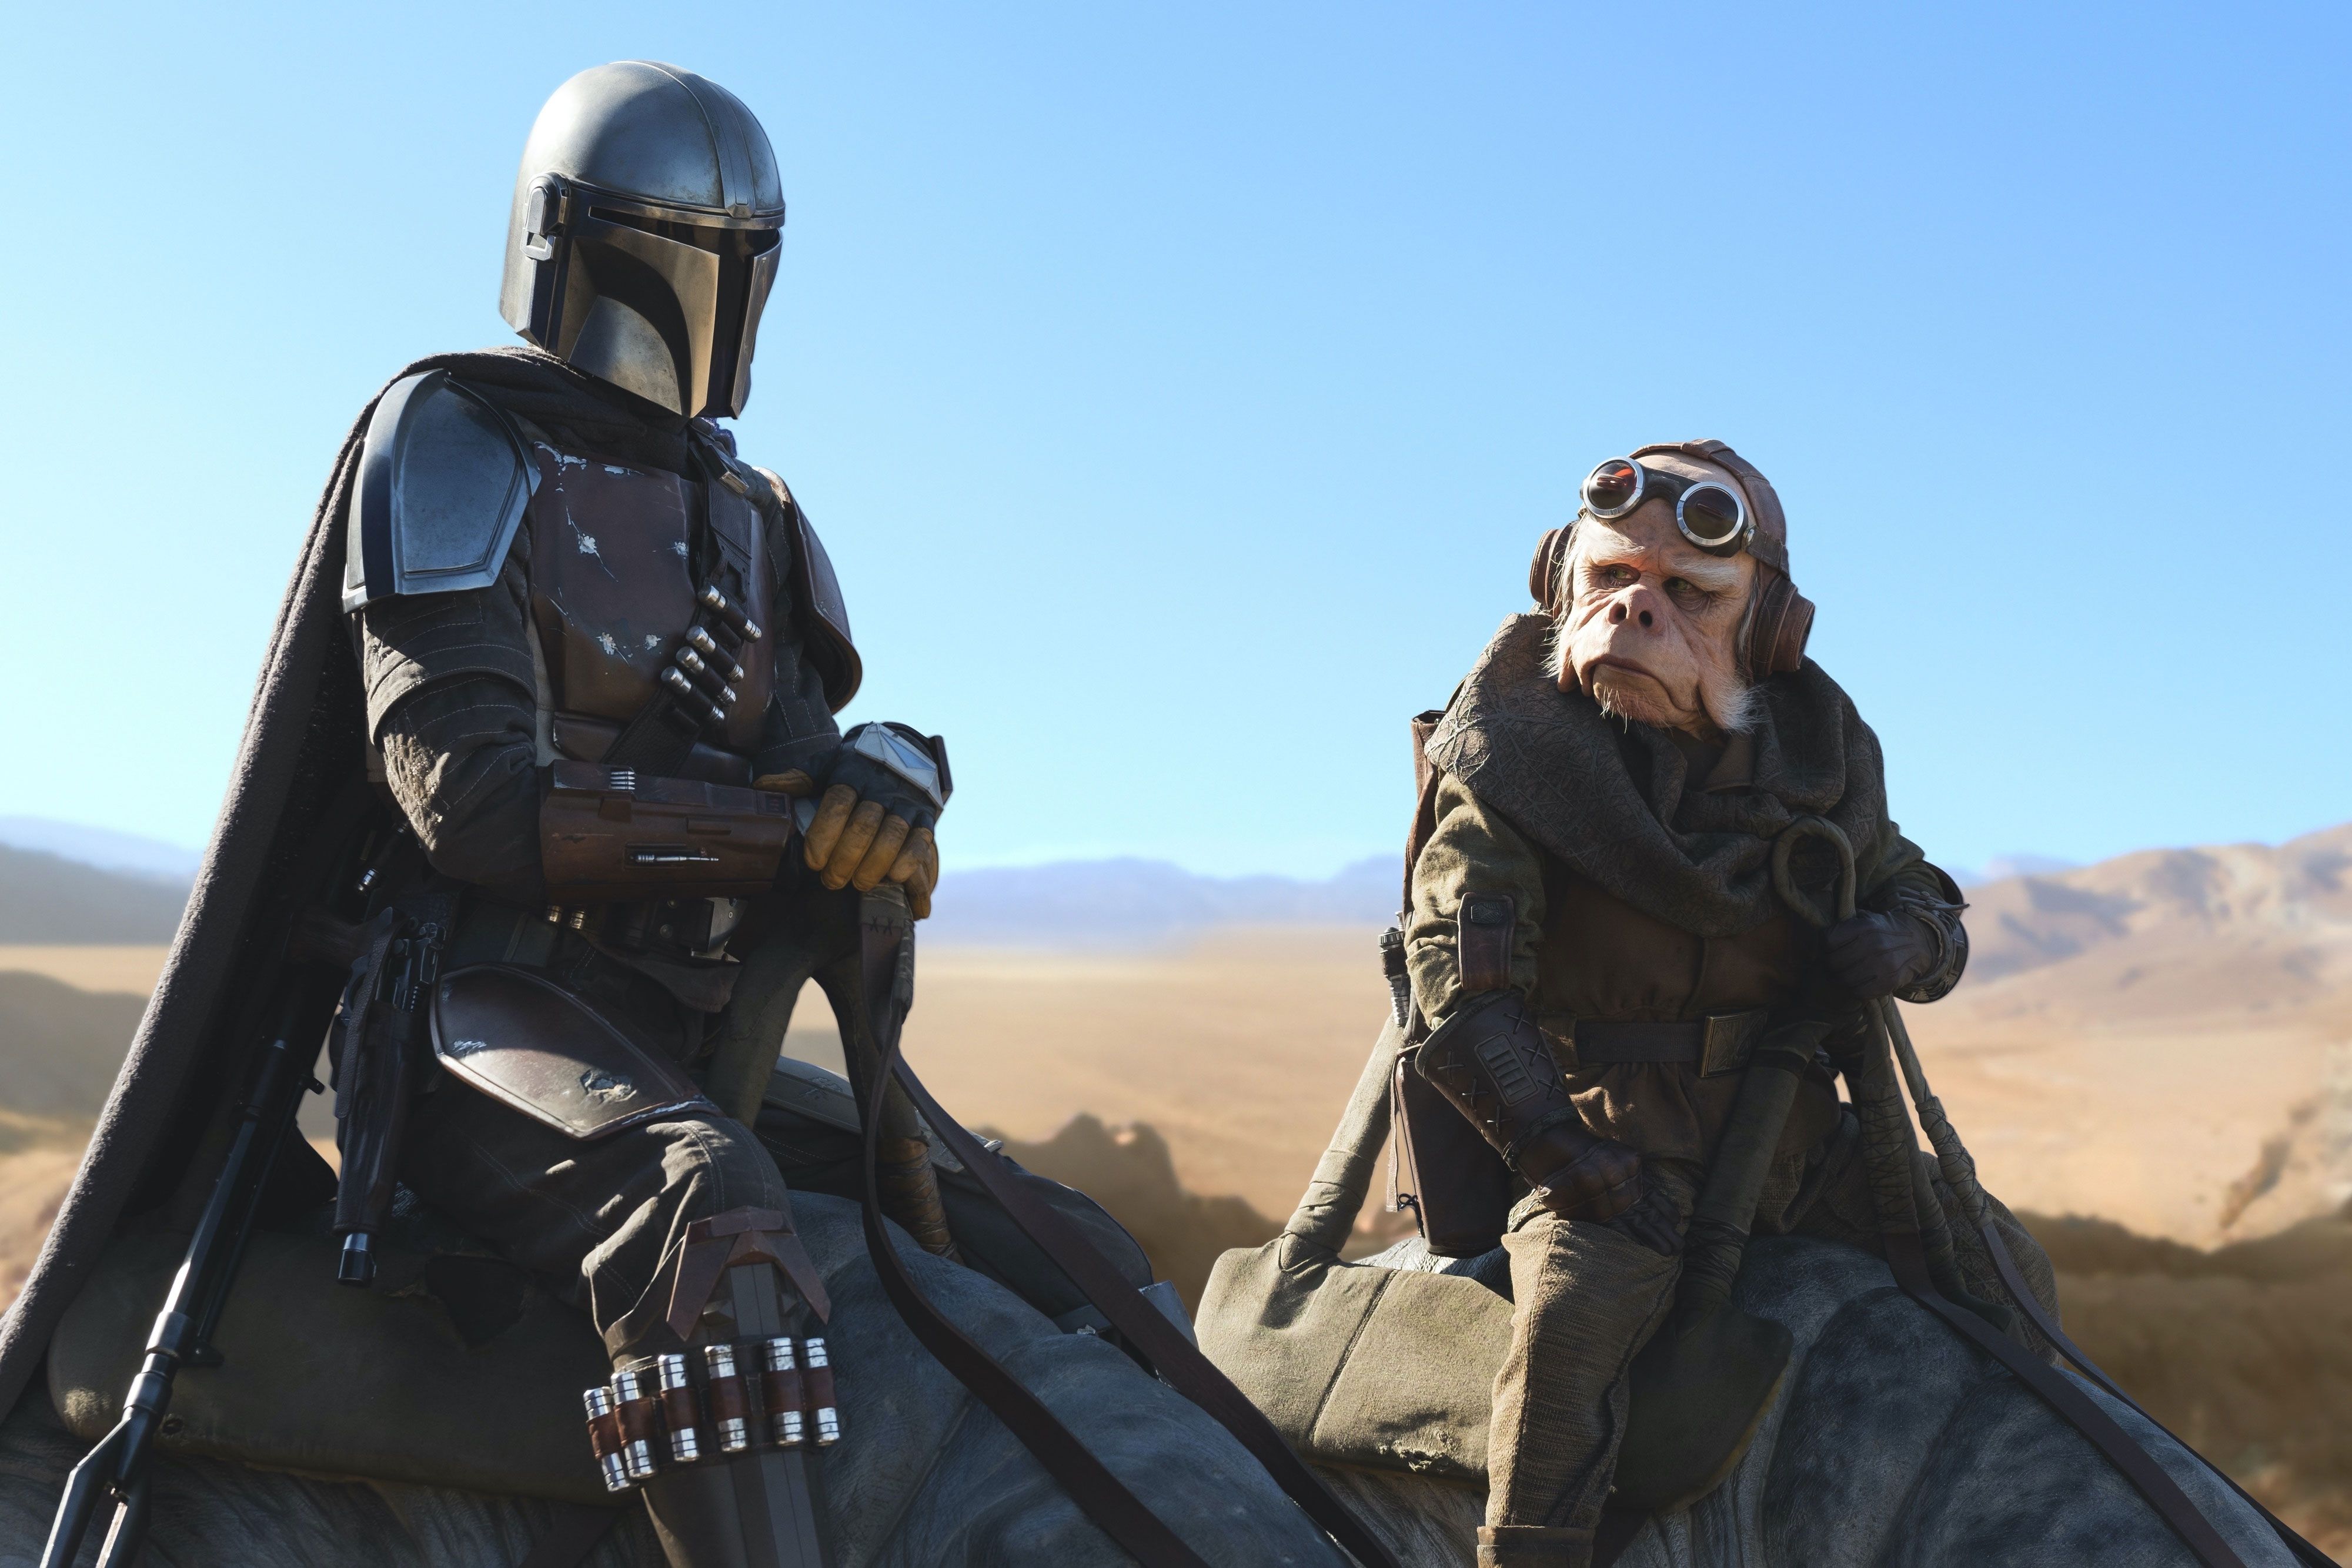 Where Does 'The Mandalorian' Fit in the 'Star Wars' Timeline?